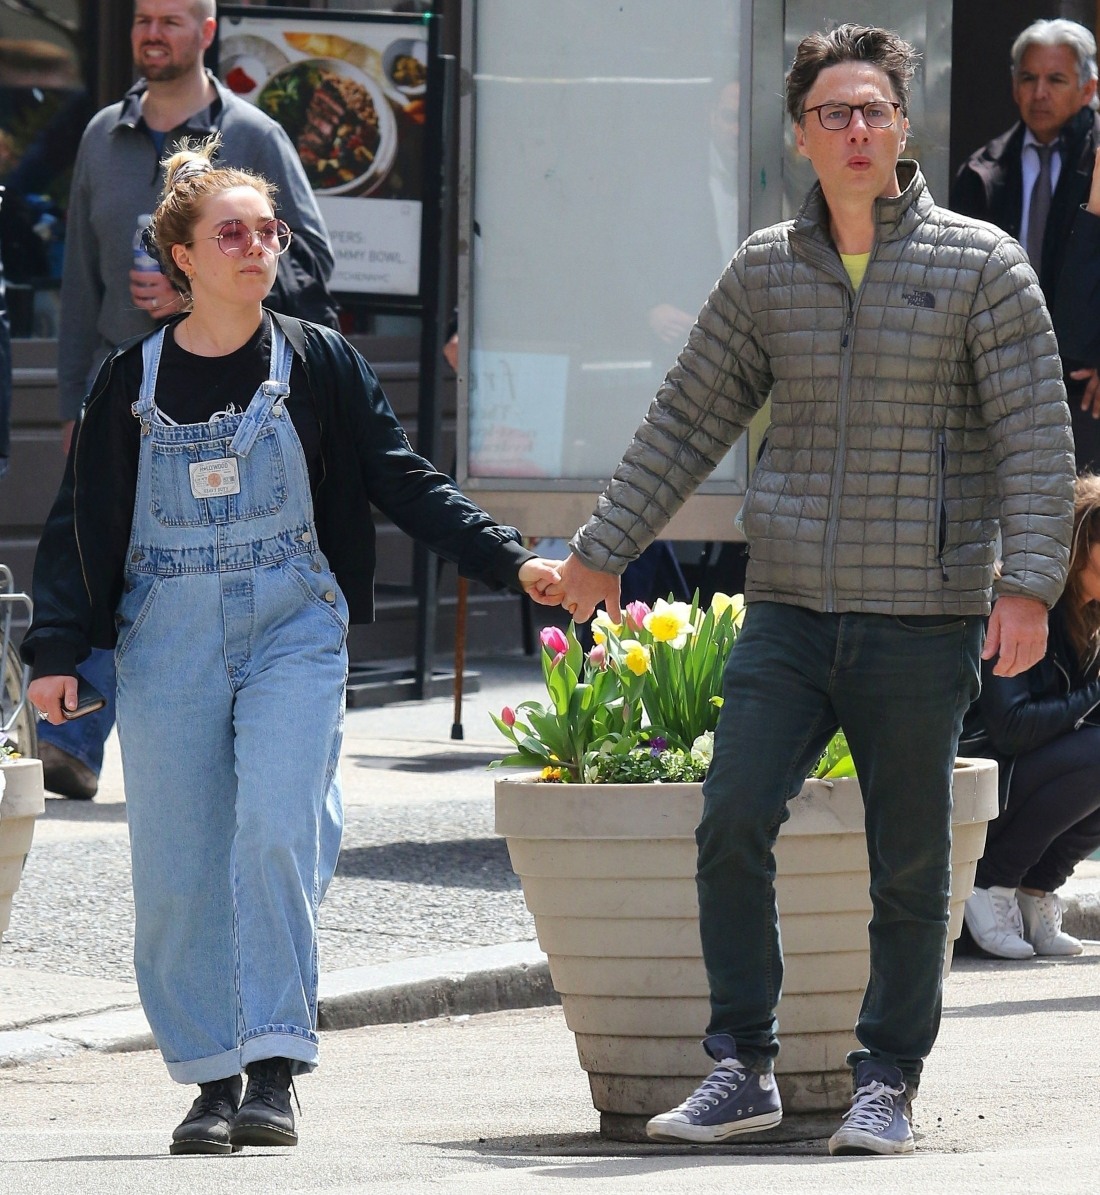 Zach Braff spotted hand-in-hand with Florence Pugh in NYC!